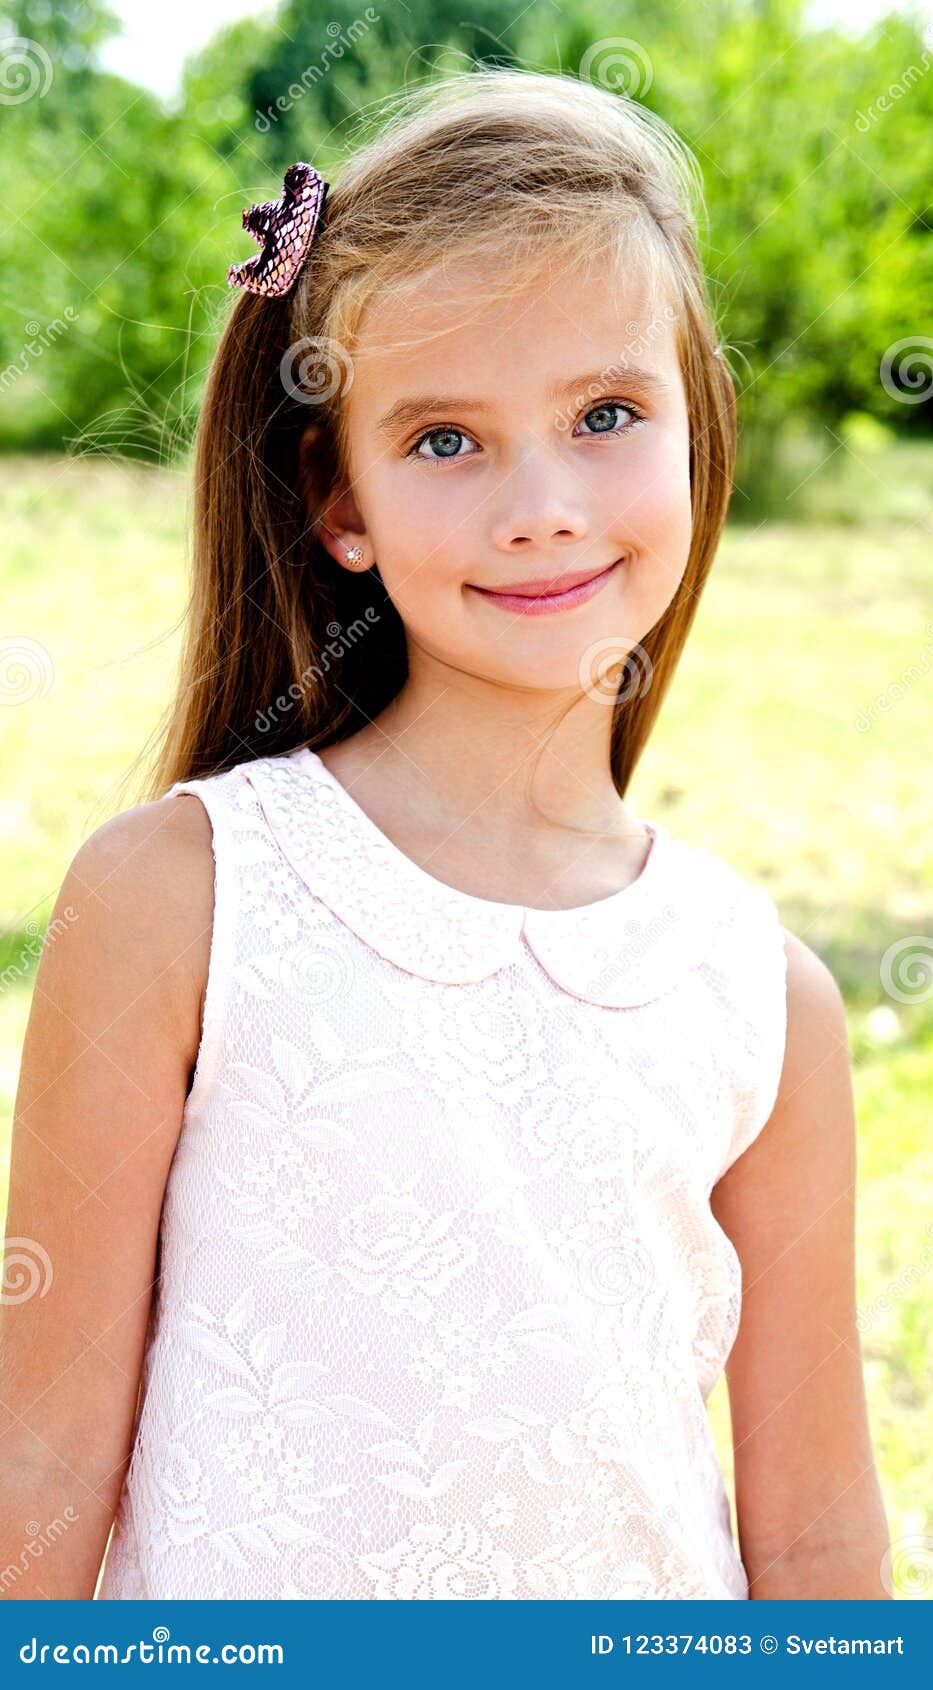 Portrait of Adorable Smiling Little Girl Outdoors Stock Image - Image ...